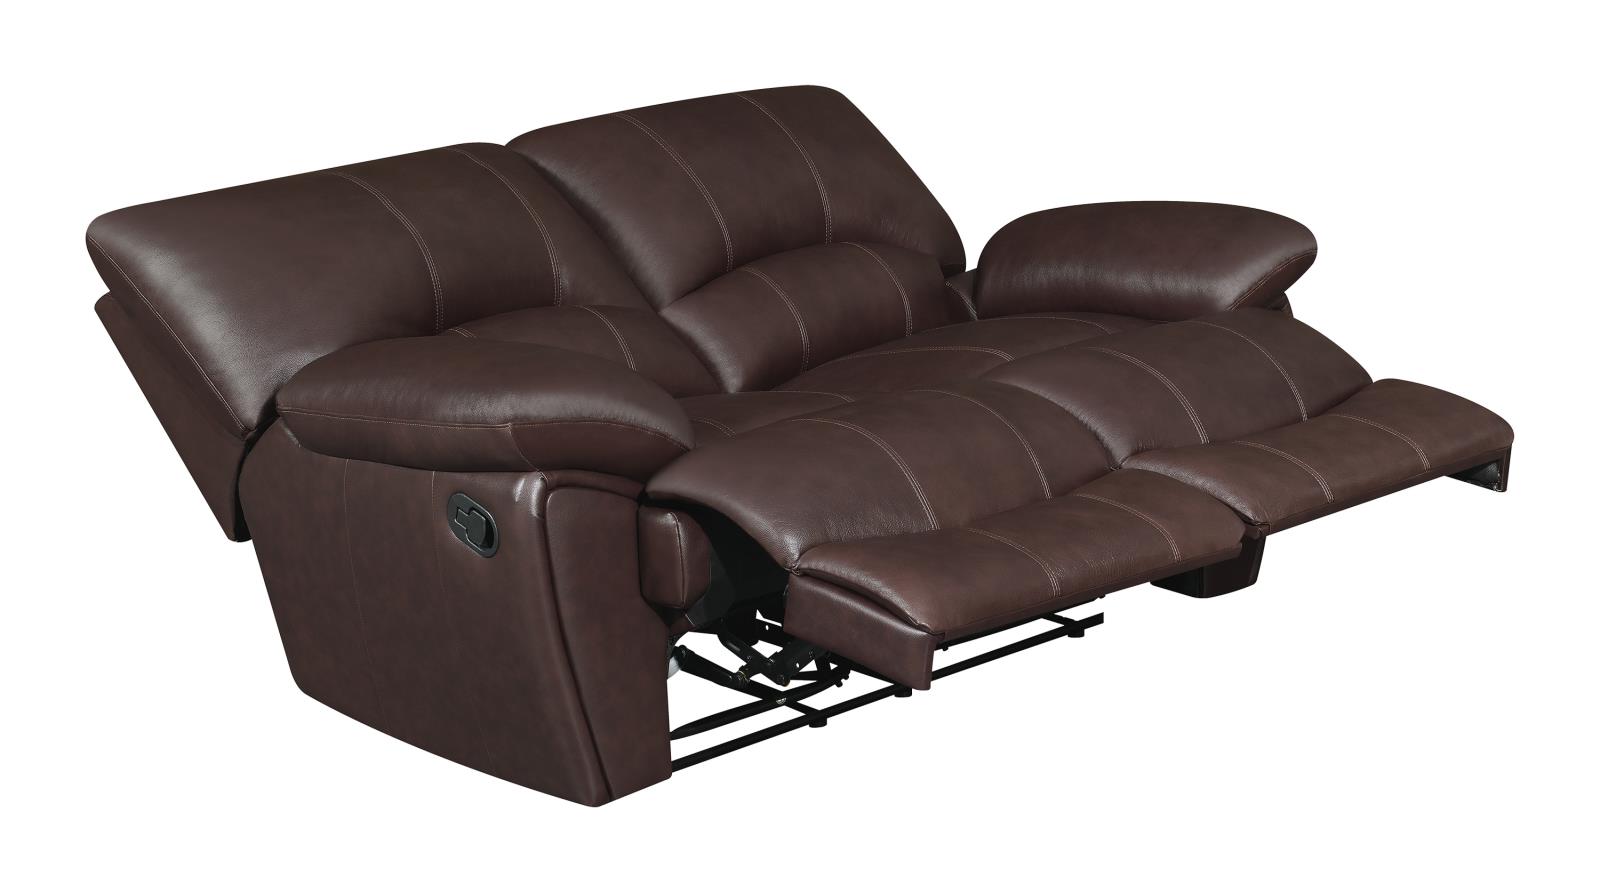 Clifford Pillow Top Arm Motion Loveseat Chocolate - What A Room